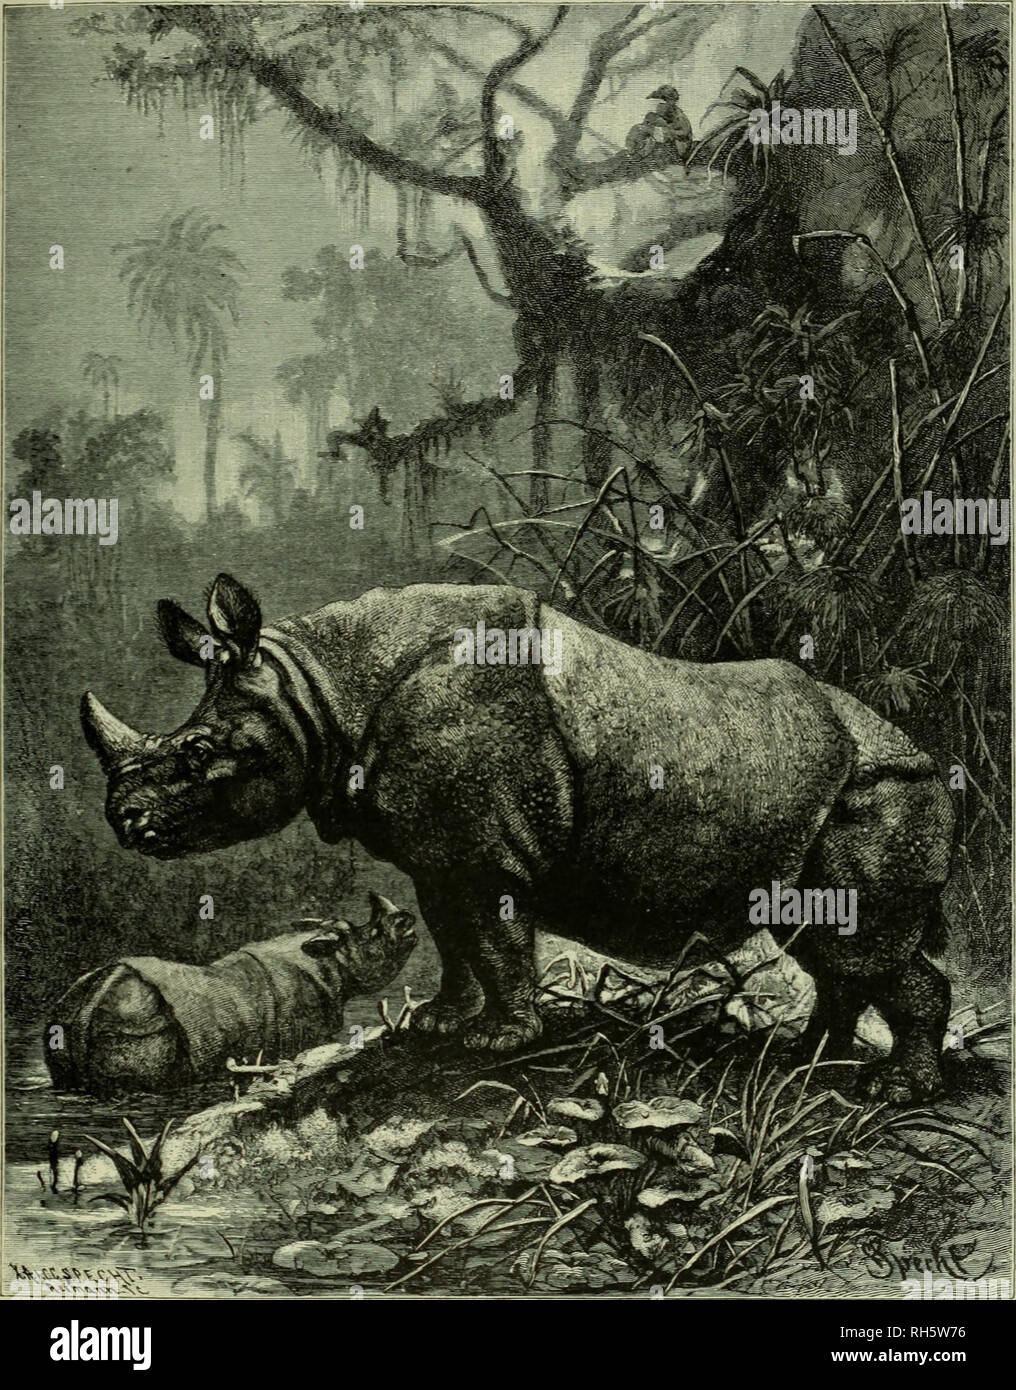 Brehm's Life of animals : a complete natural history for popular home  instruction and for the use of schools. Mammalia. Mammals; Animal behavior.  INDIAN RHINOCEROS. Here in a deep, damp part